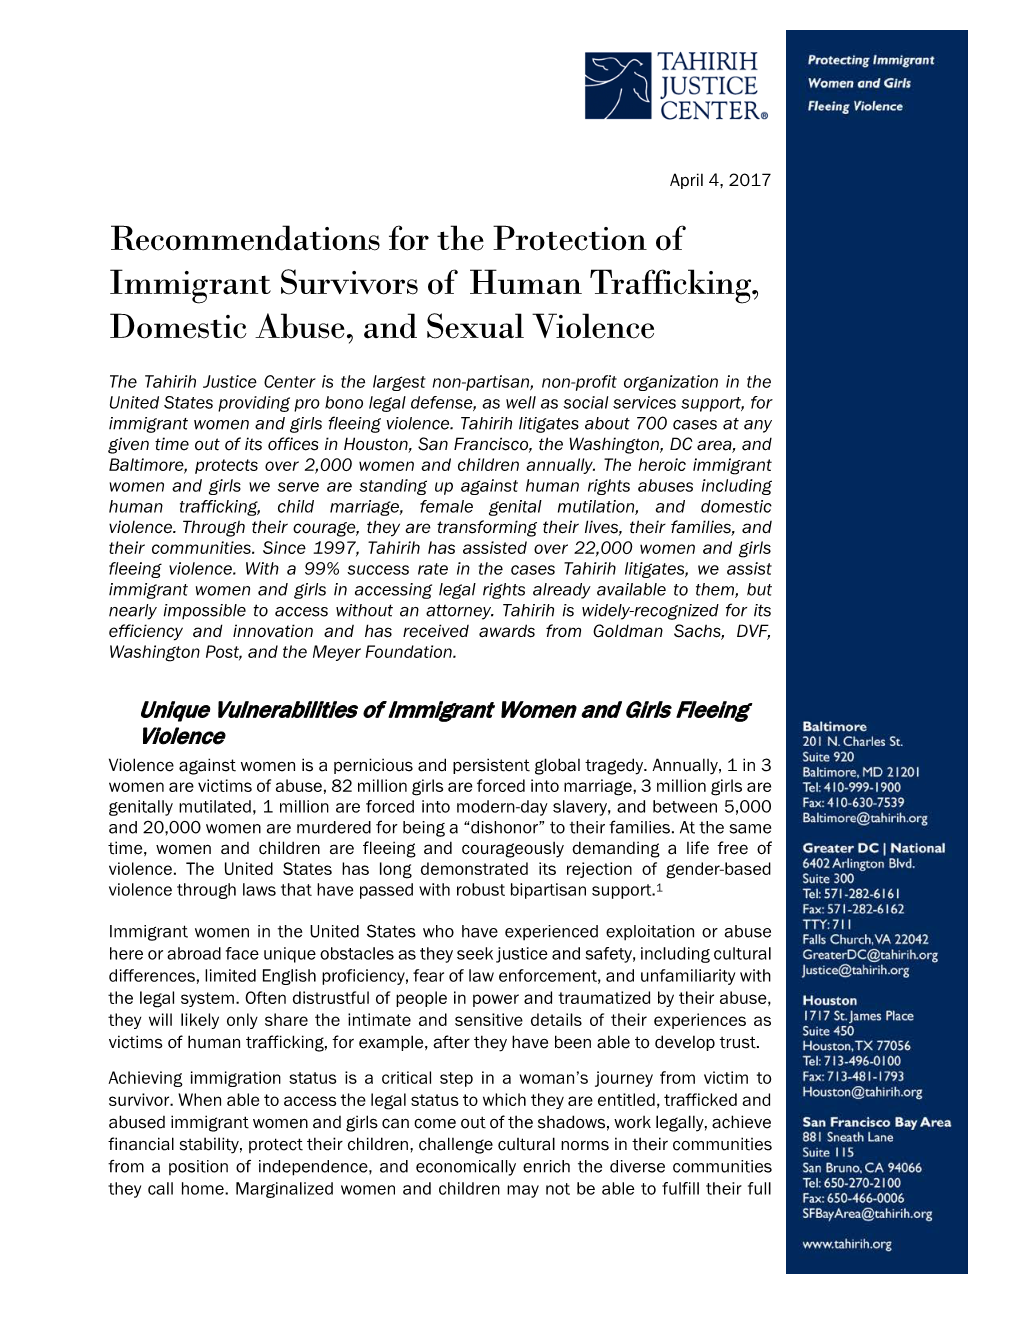 Recommendations for the Protection of Immigrant Survivors of Human Trafficking, Domestic Abuse, and Sexual Violence